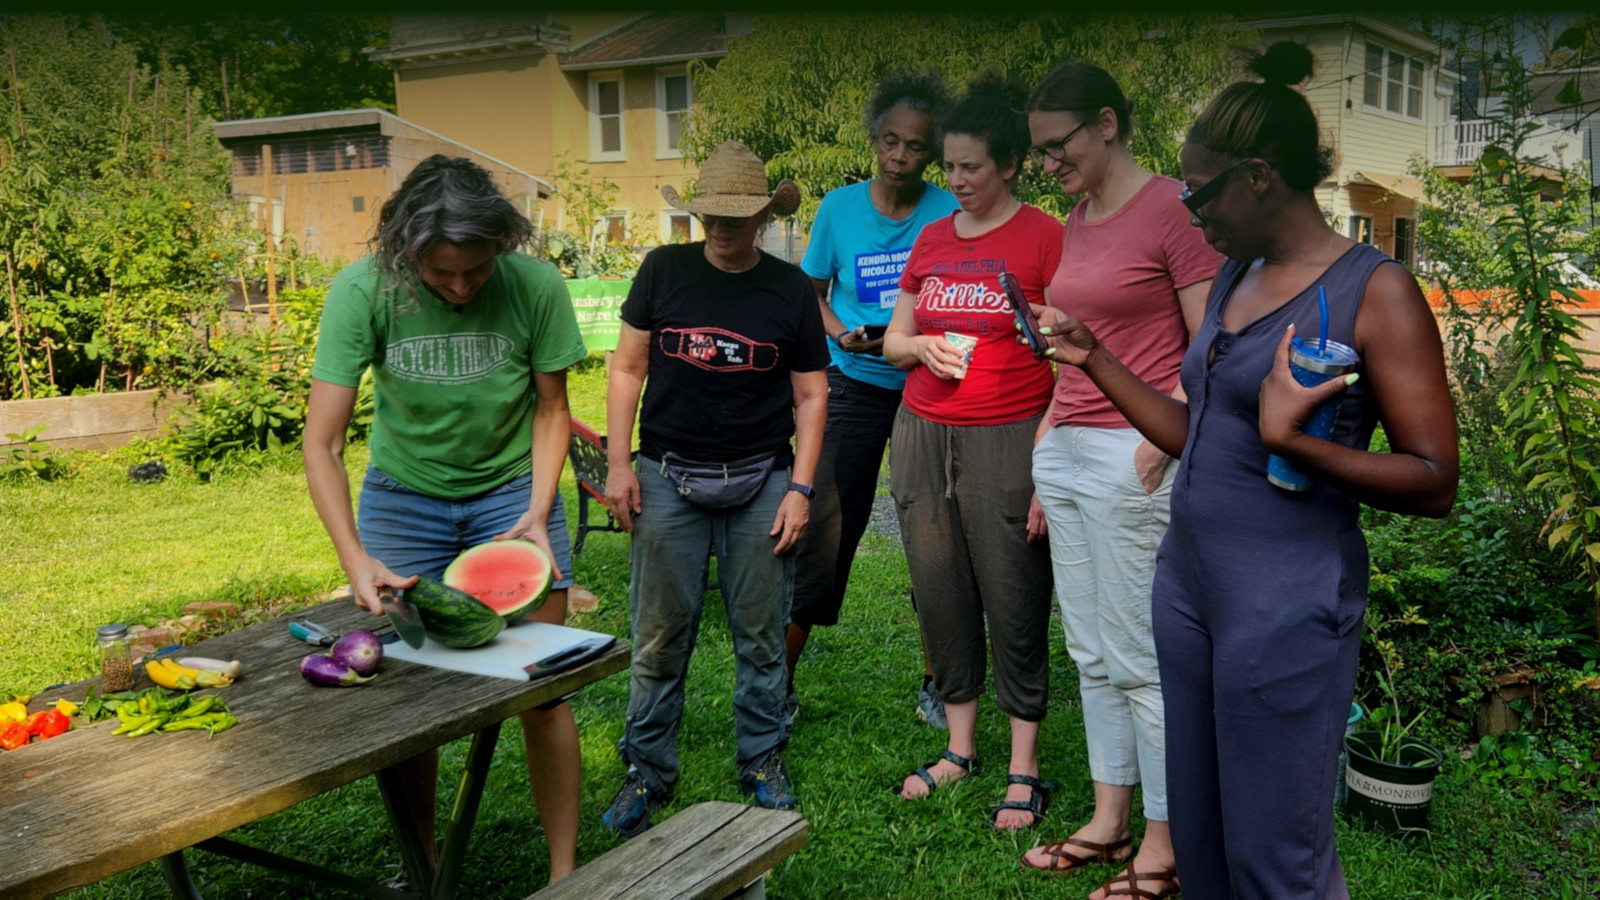 photo: people watching a woman cut a watermelon on a picnic table